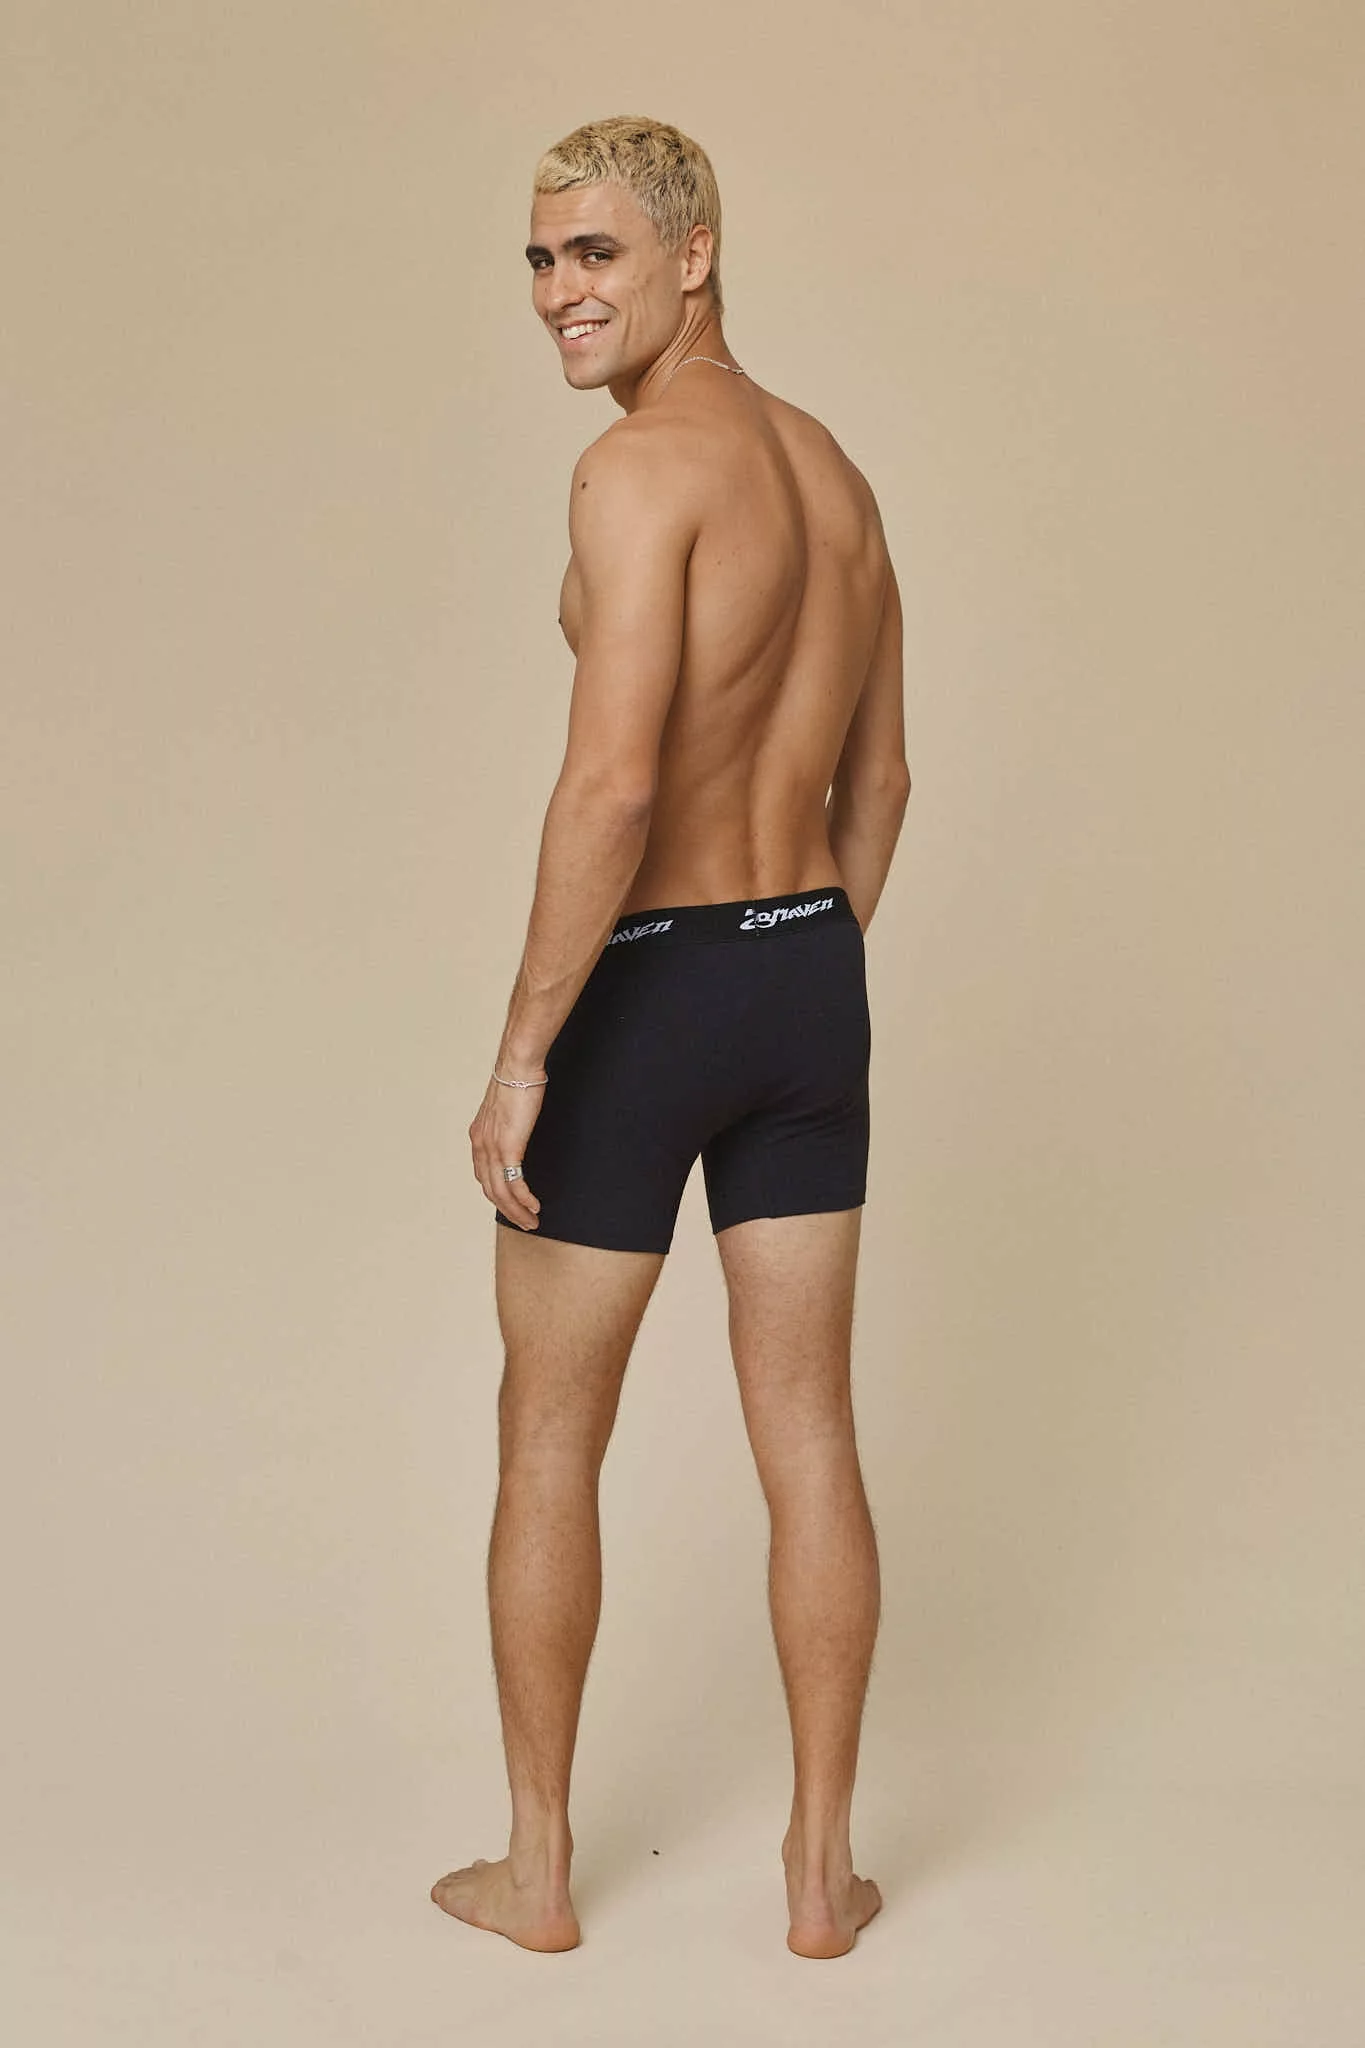 WAMA Hemp Underwear Are Some Of The Most Comfortable Boxer Shorts